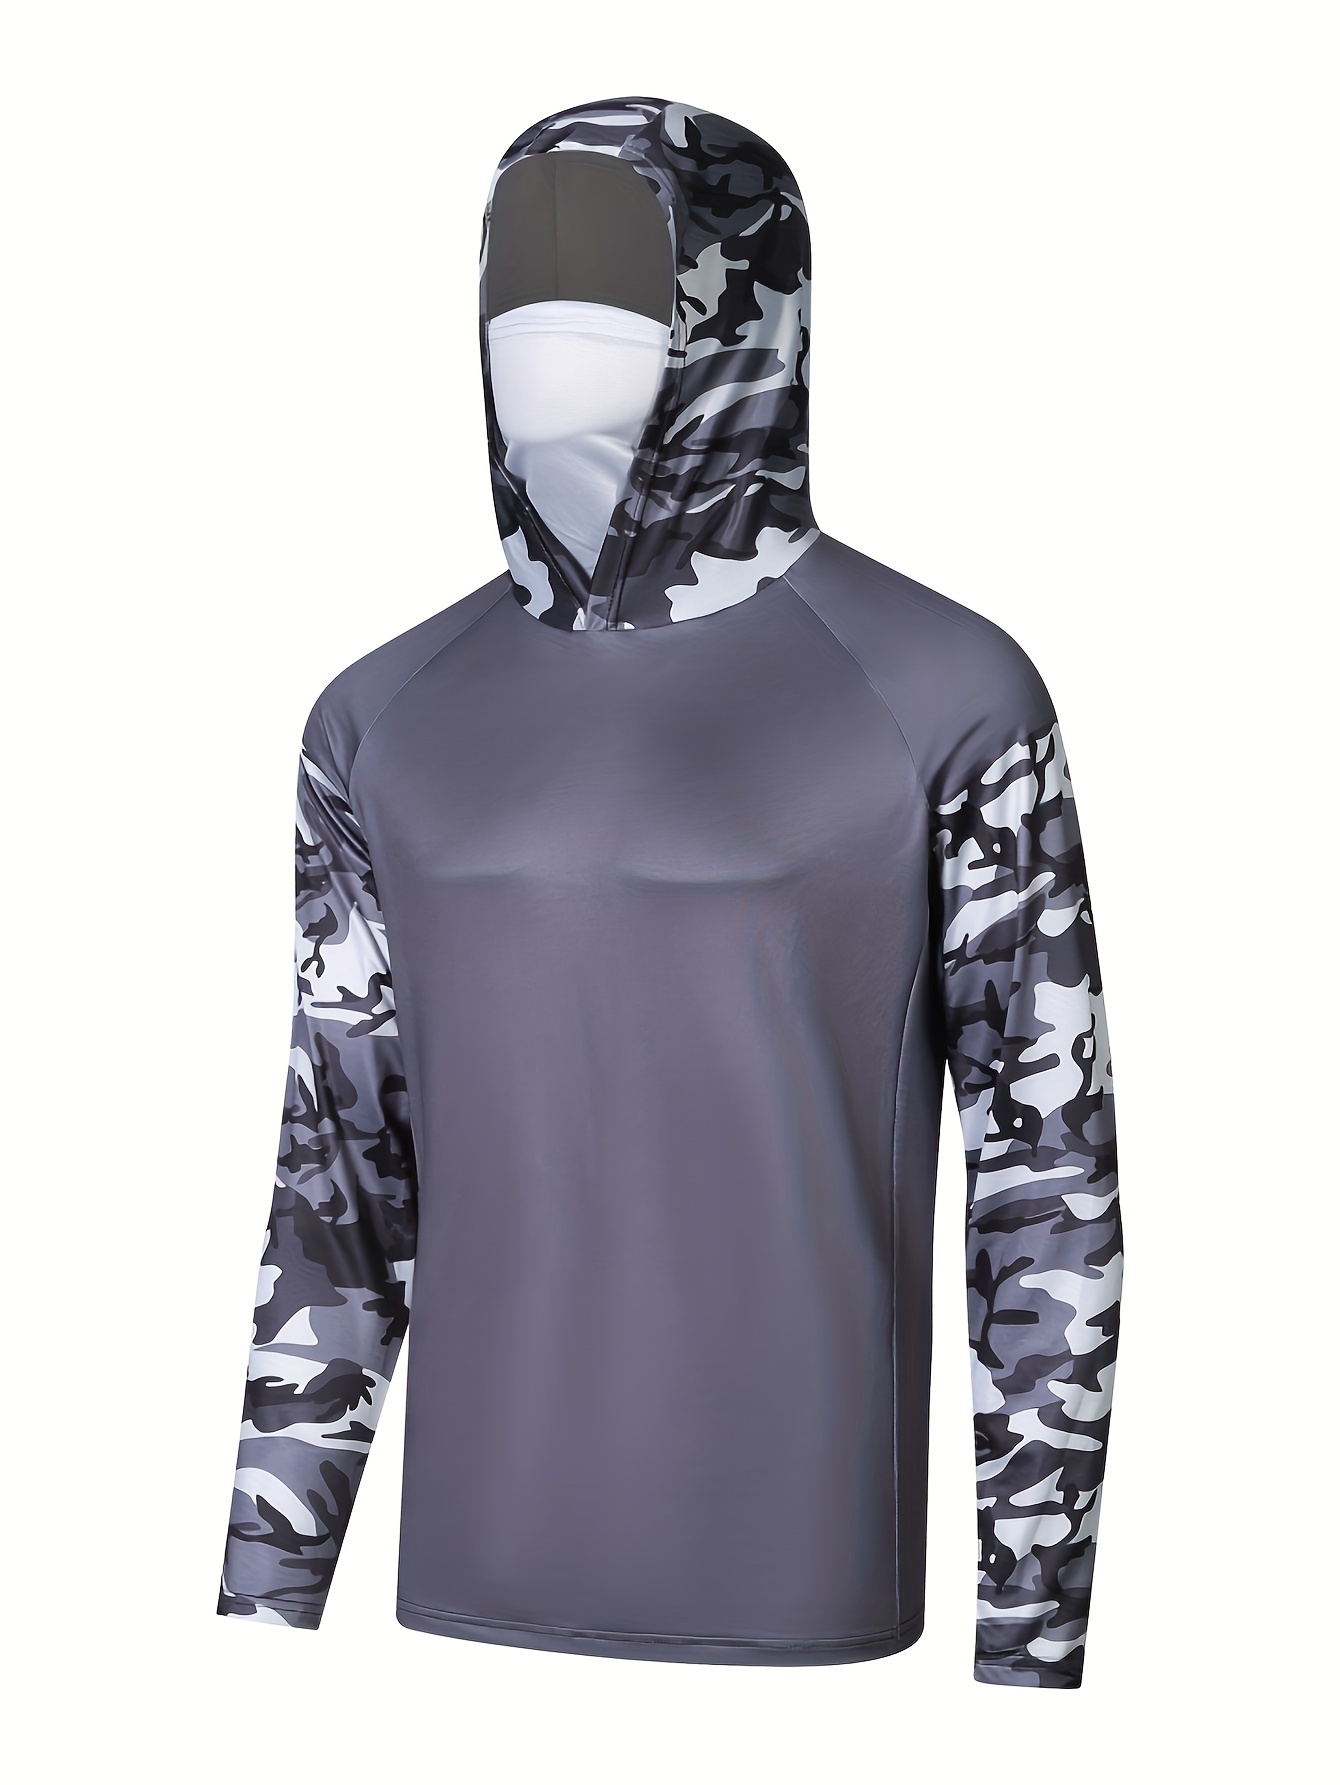 Men's Camouflage UPF 50+ Sun Protection Hoodie With Mask, Long Sleeve Comfy Quick Dry Tops For Men's Outdoor Fishing Activities